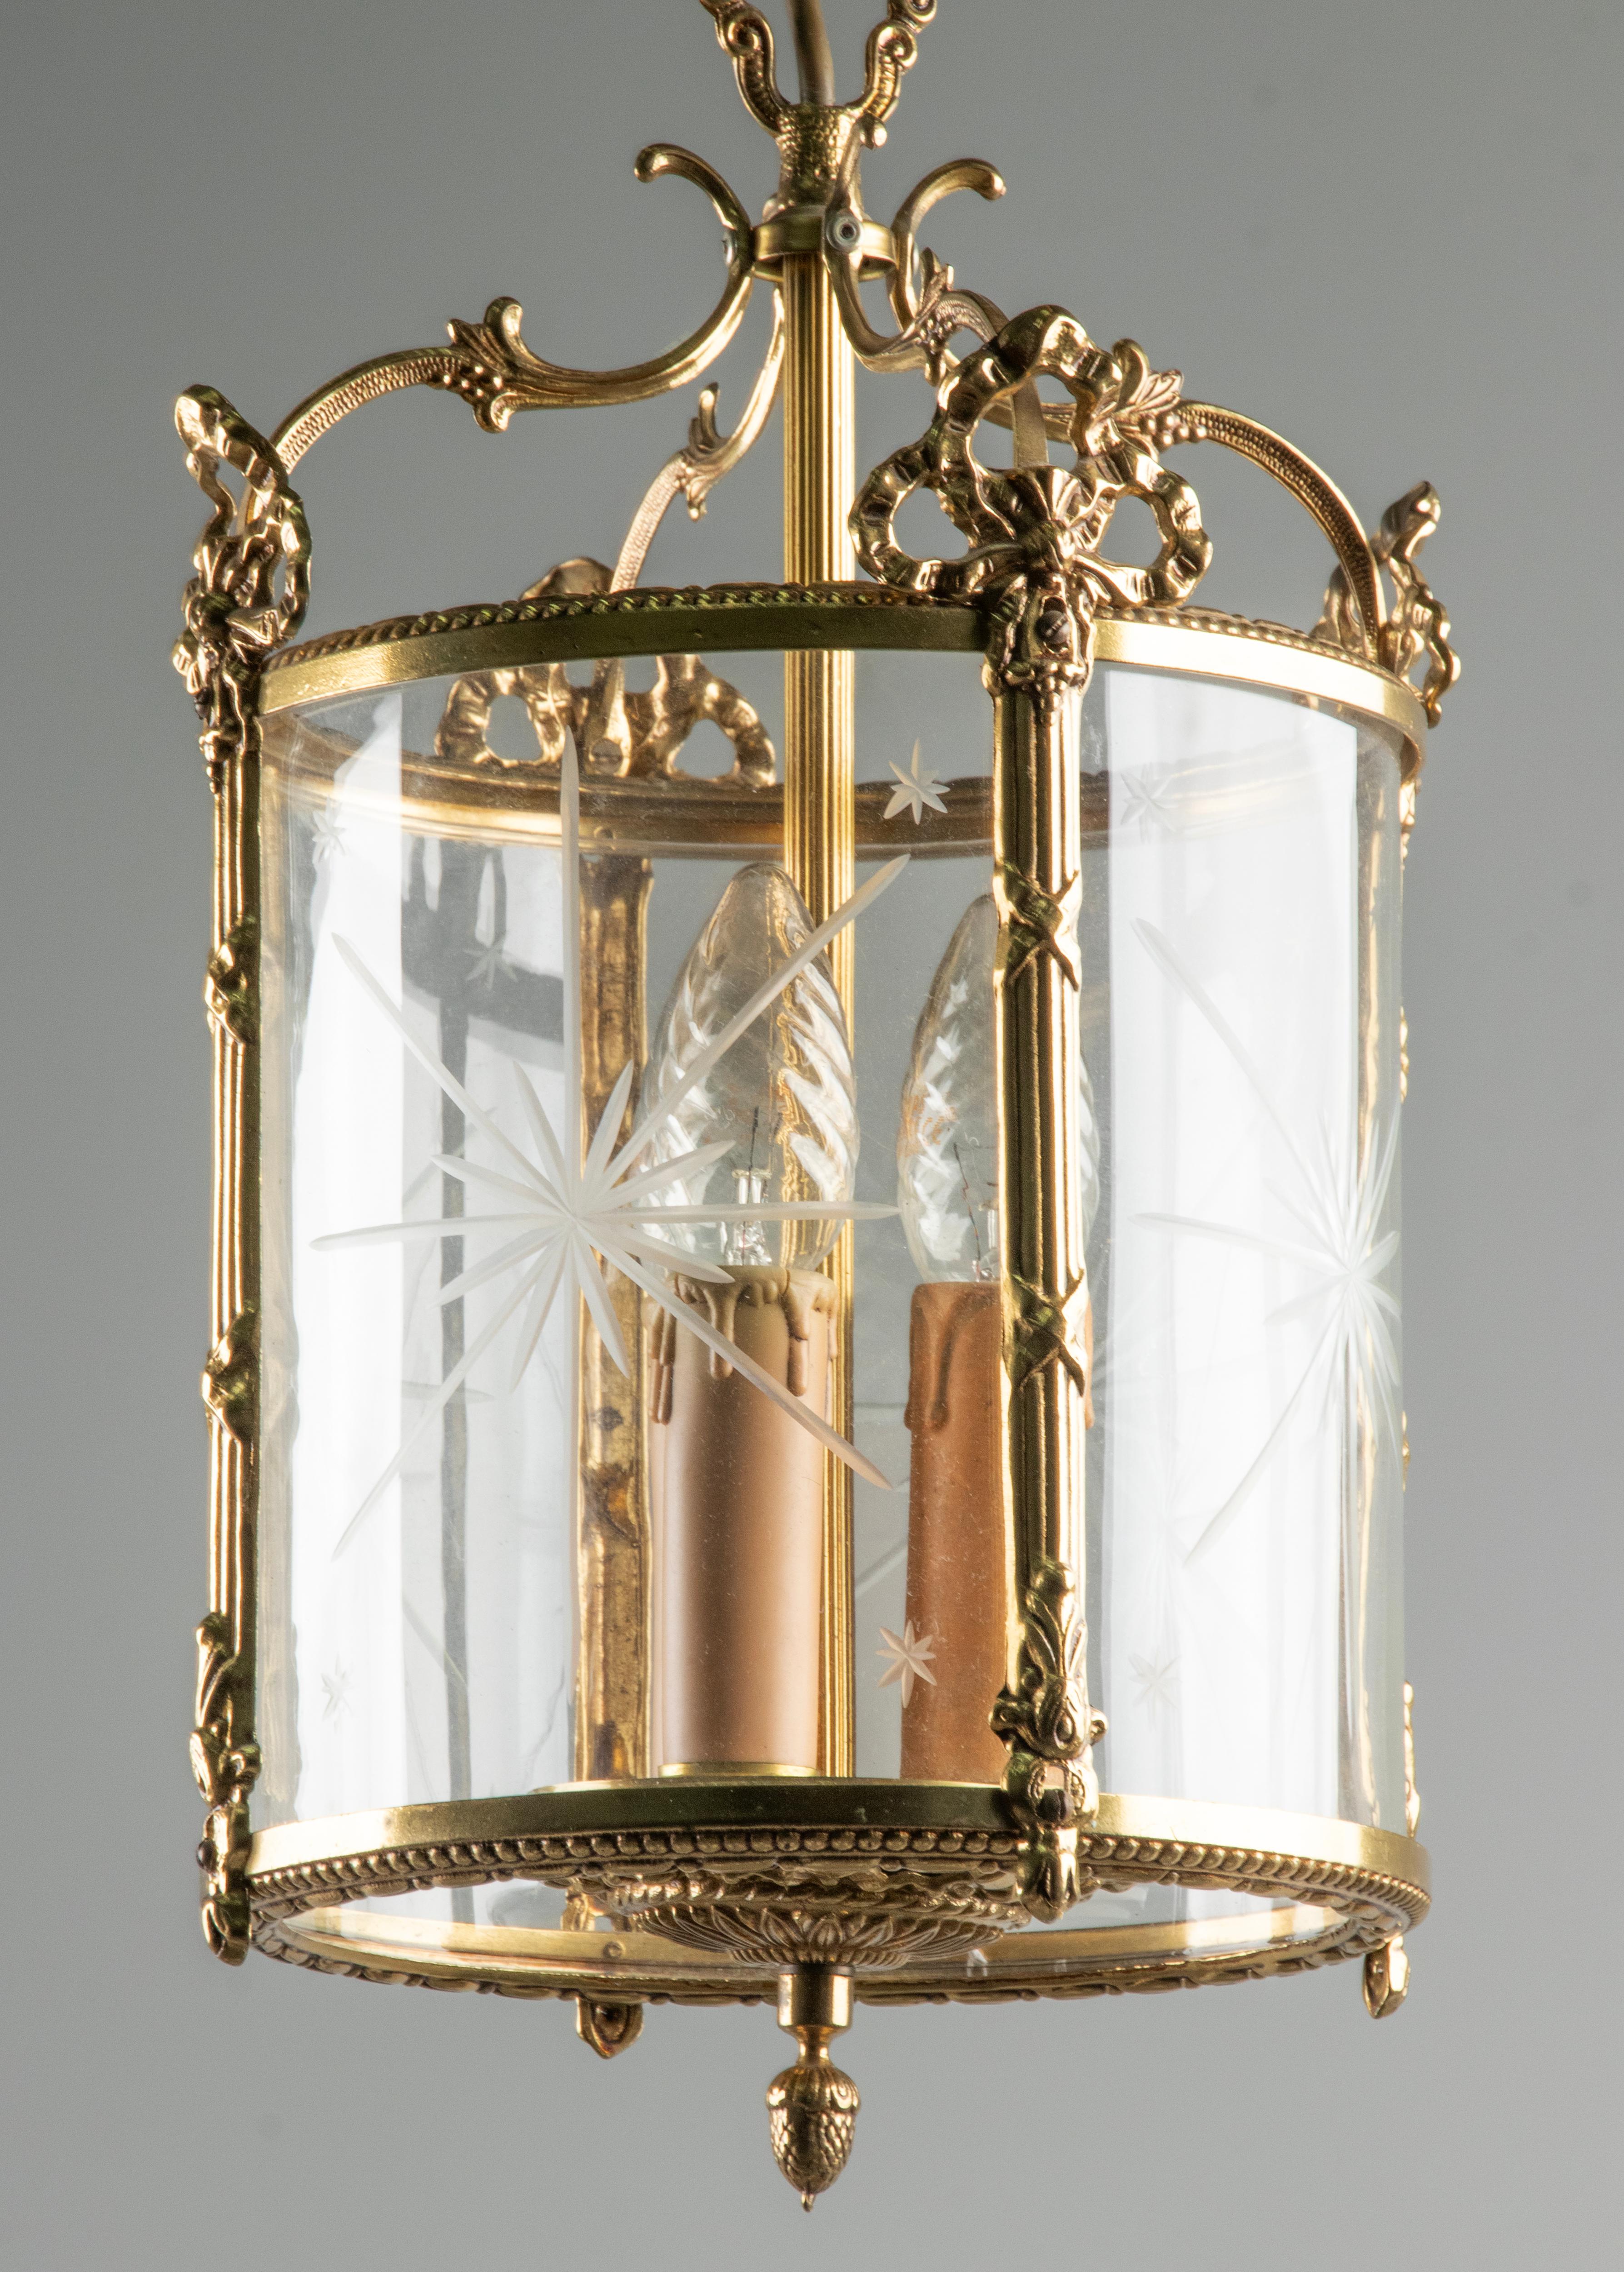 Mid 20th Century Brass Louis XVI Style Hallway Lantern Lamp In Good Condition For Sale In Casteren, Noord-Brabant